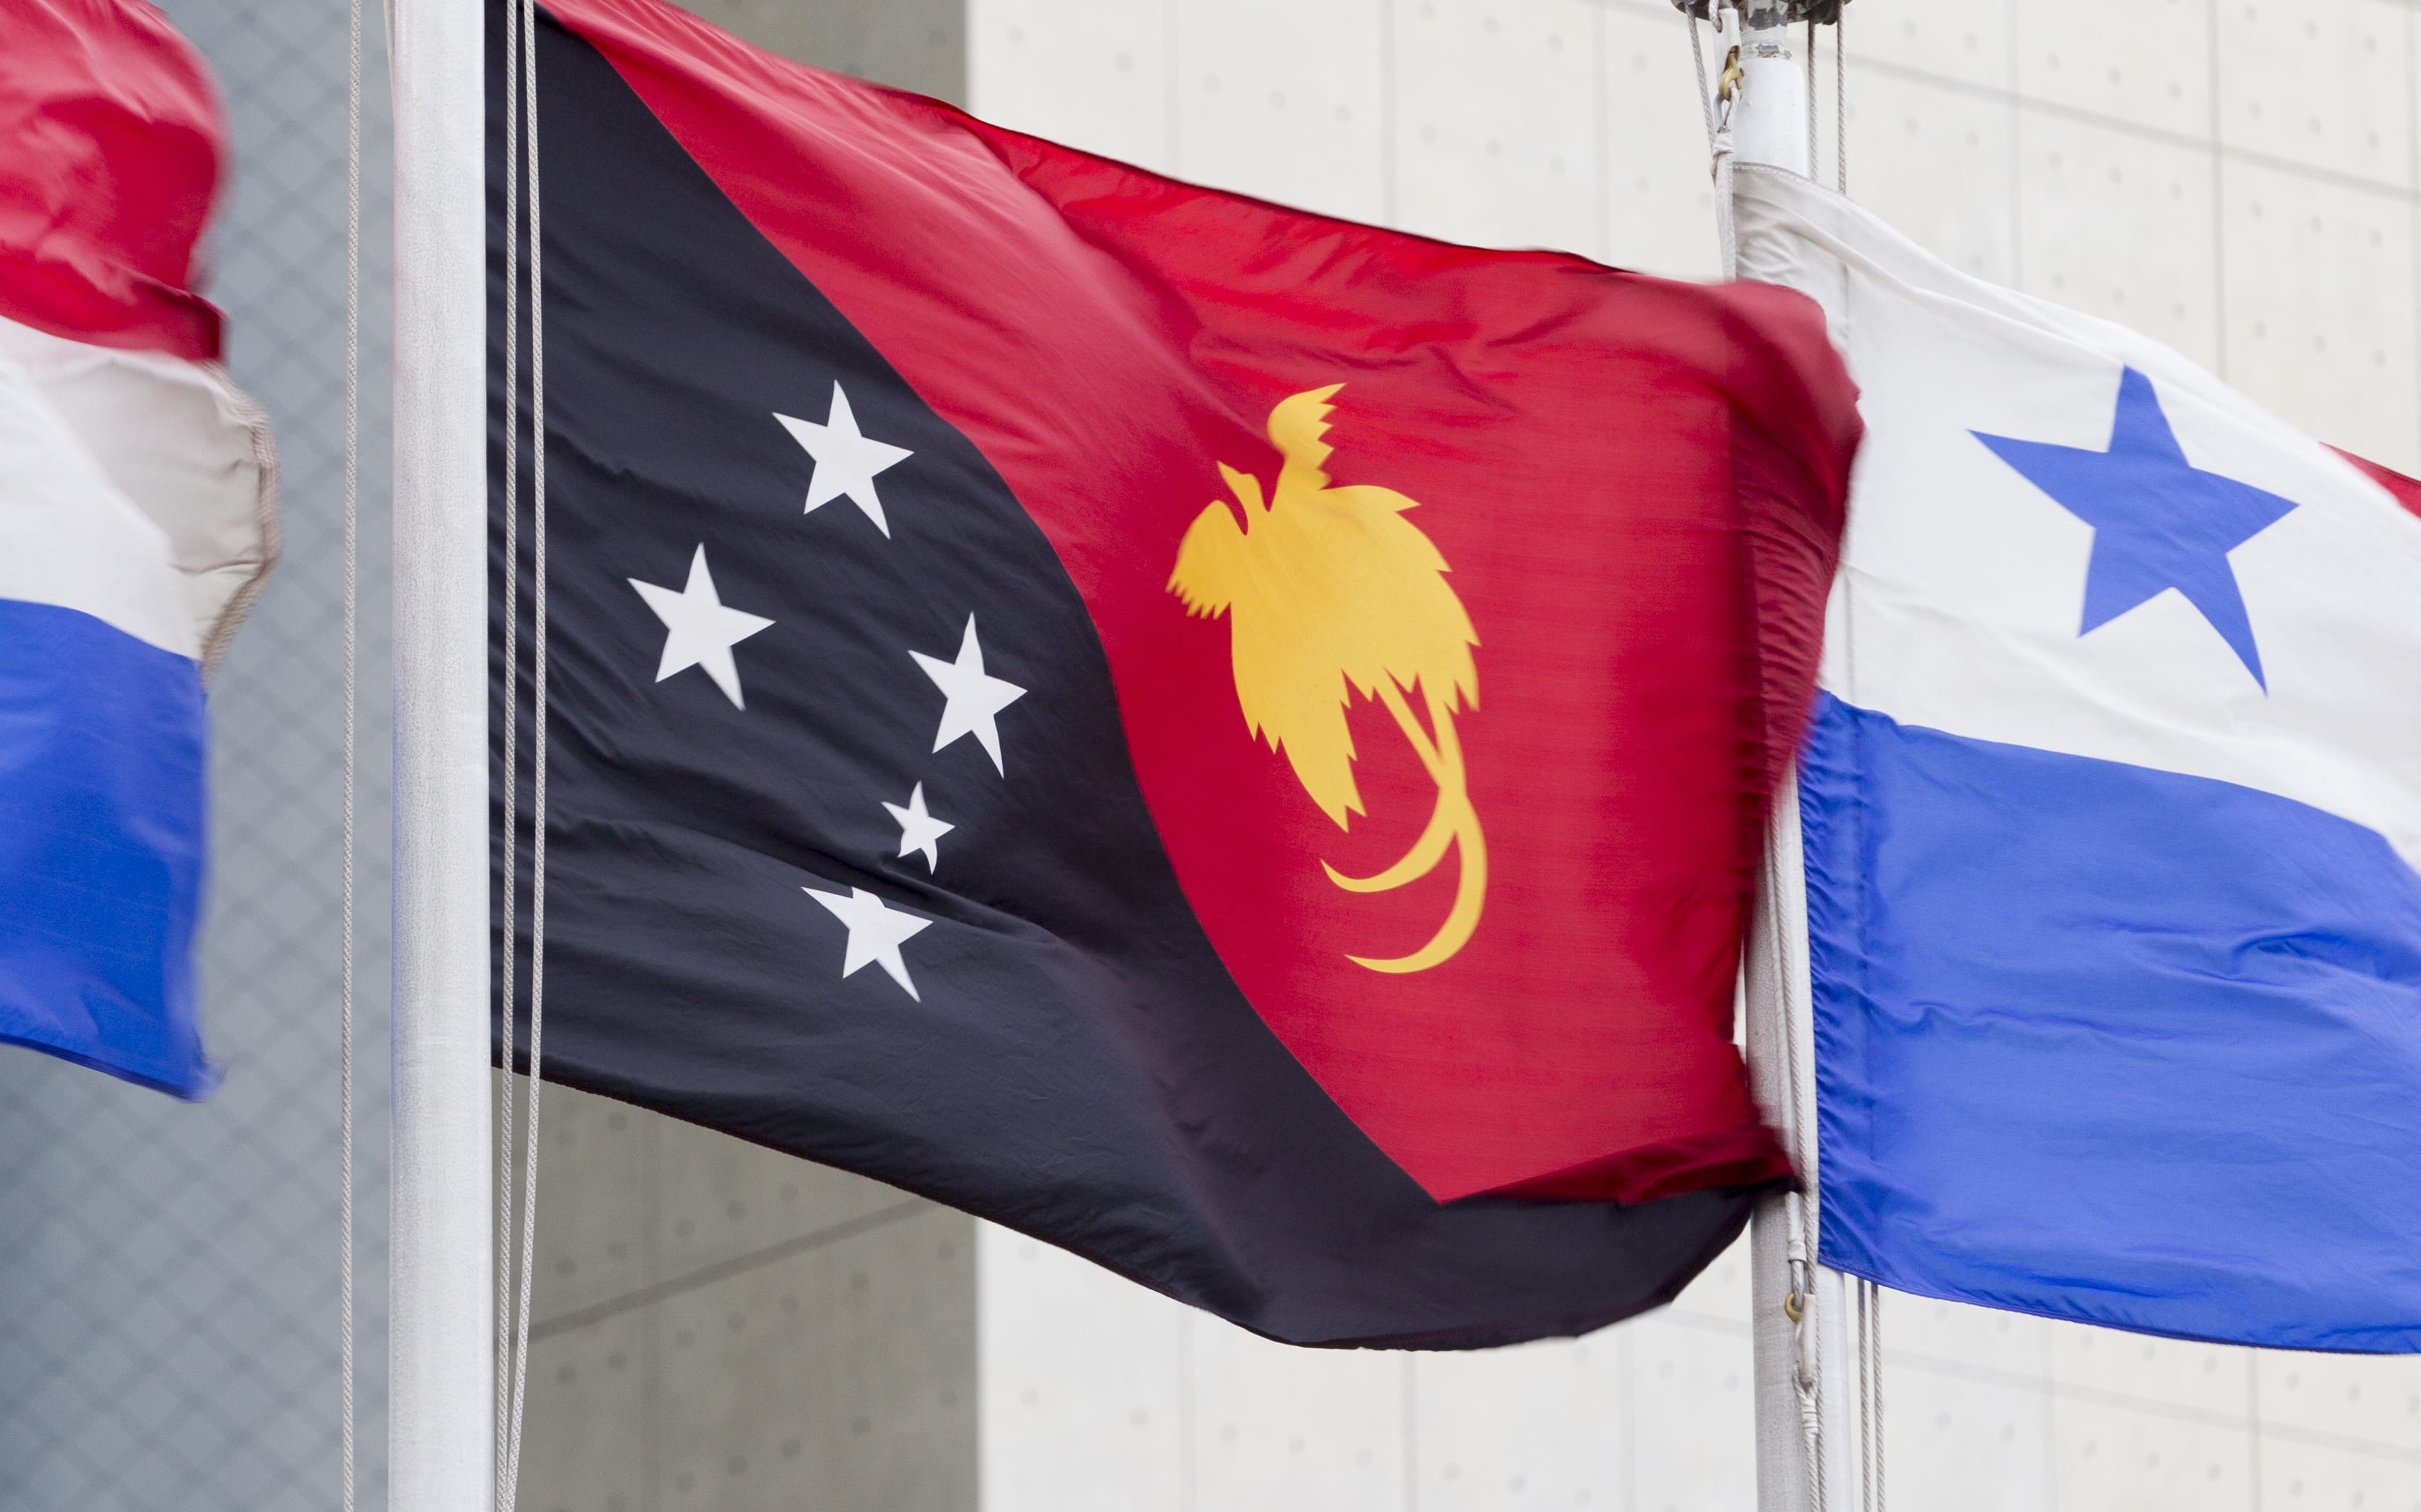 The flag of the Independent State of Papua New Guinea (centre) flying at United Nations headquarters in New York.14 July 2016 United Nations, New York